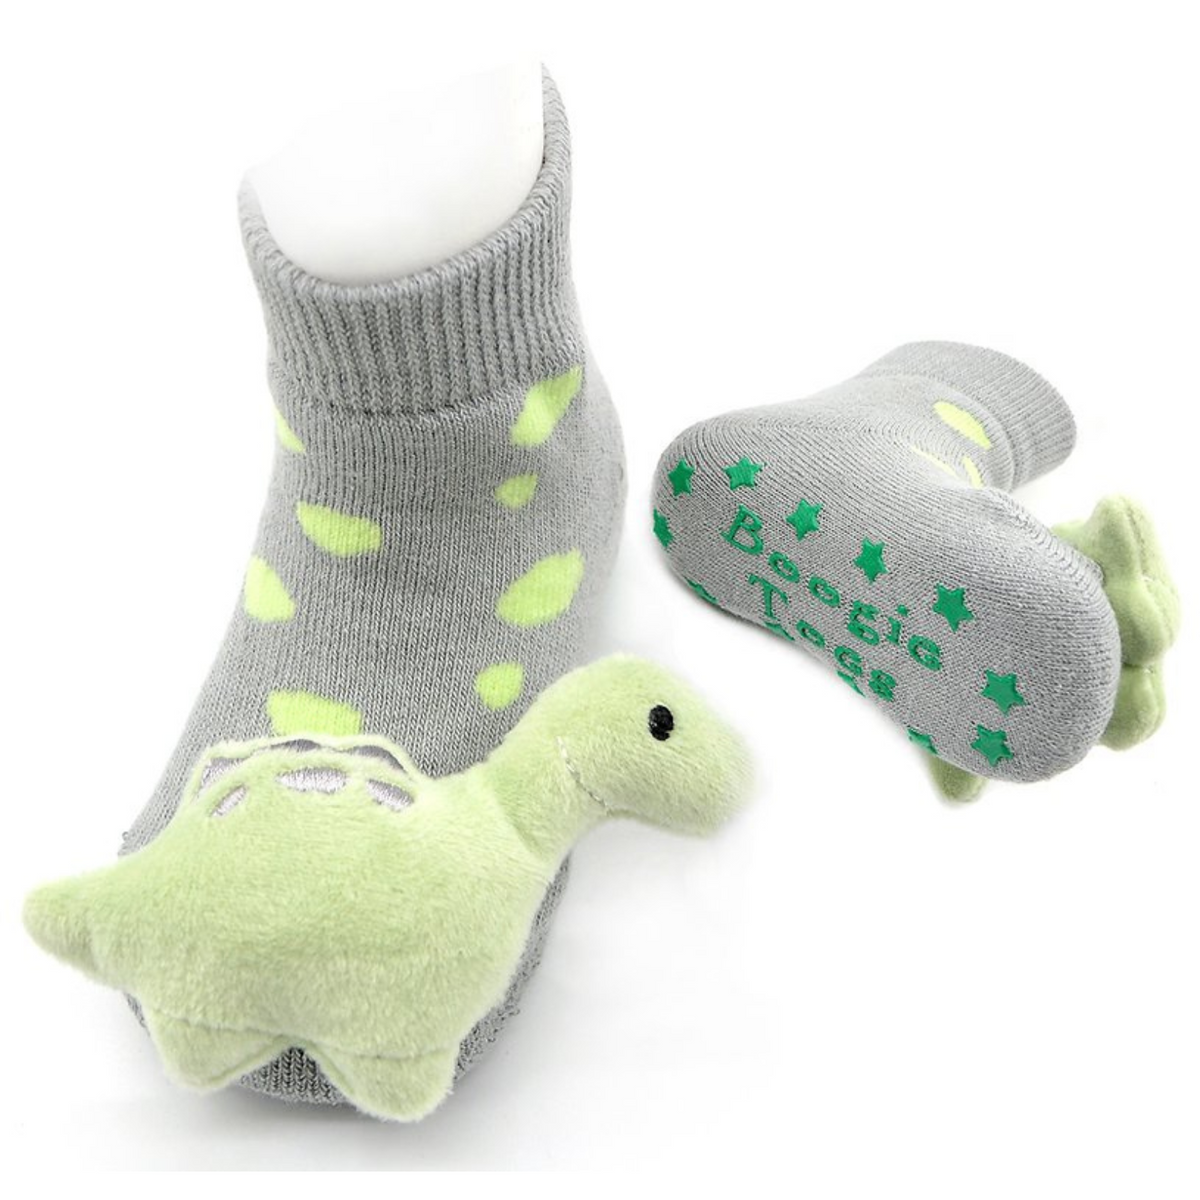 Boogie Toes gray baby socks with grips on the bottom featuring a Green Dinosaur